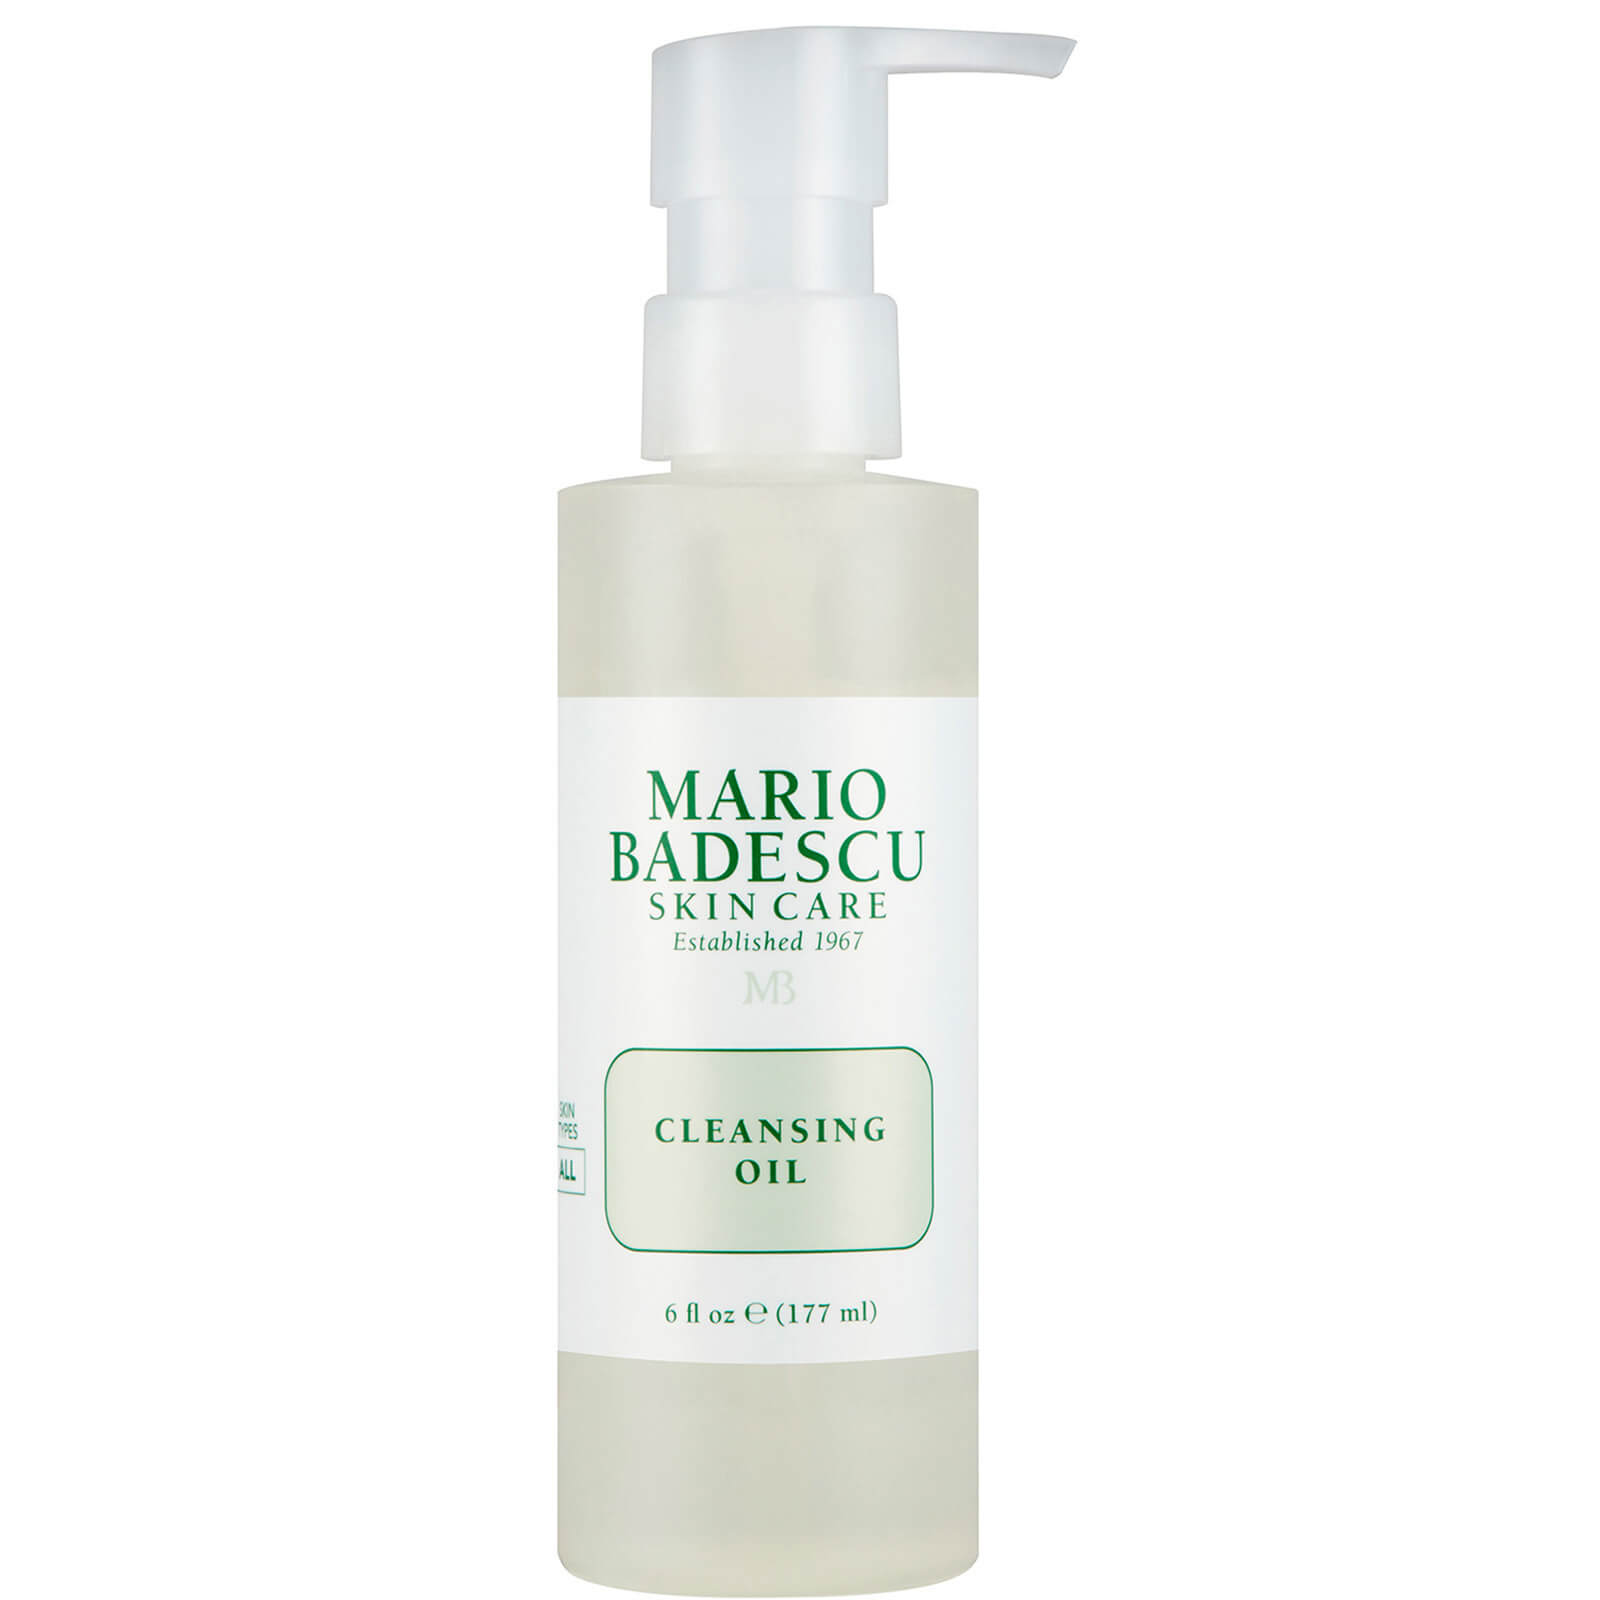 Image of Mario Badescu Cleansing Oil 117ml